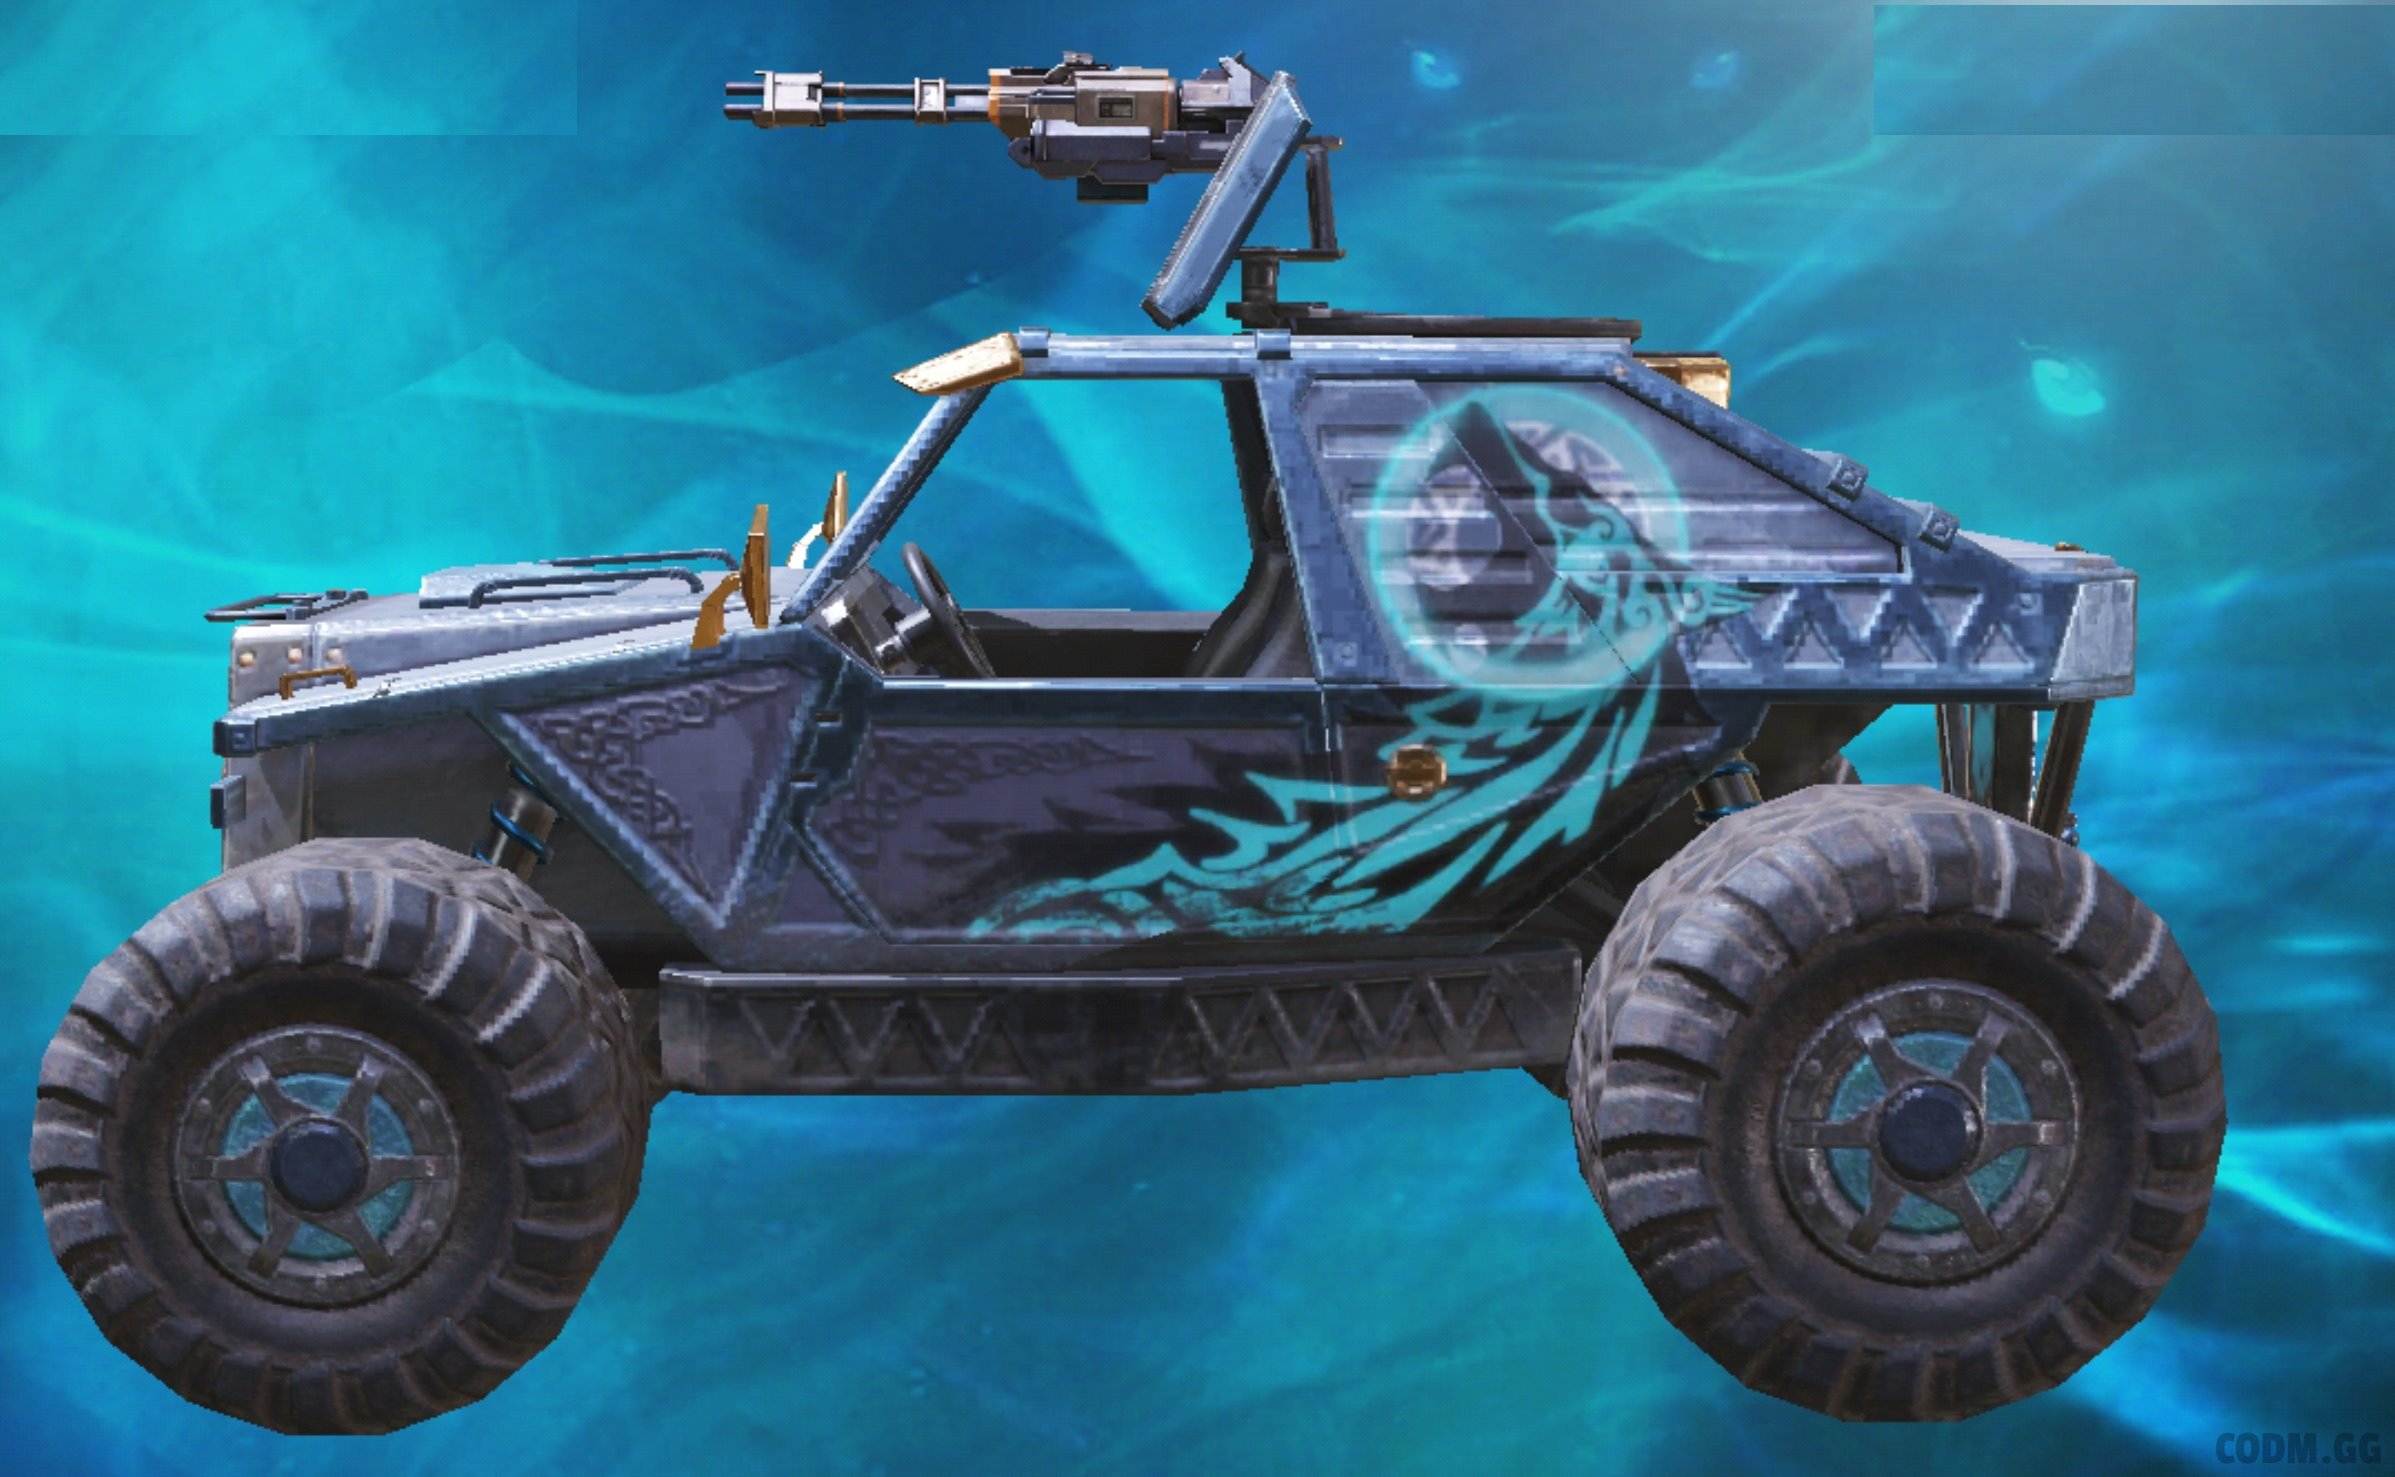 Antelope A20 Fenrir, Epic camo in Call of Duty Mobile